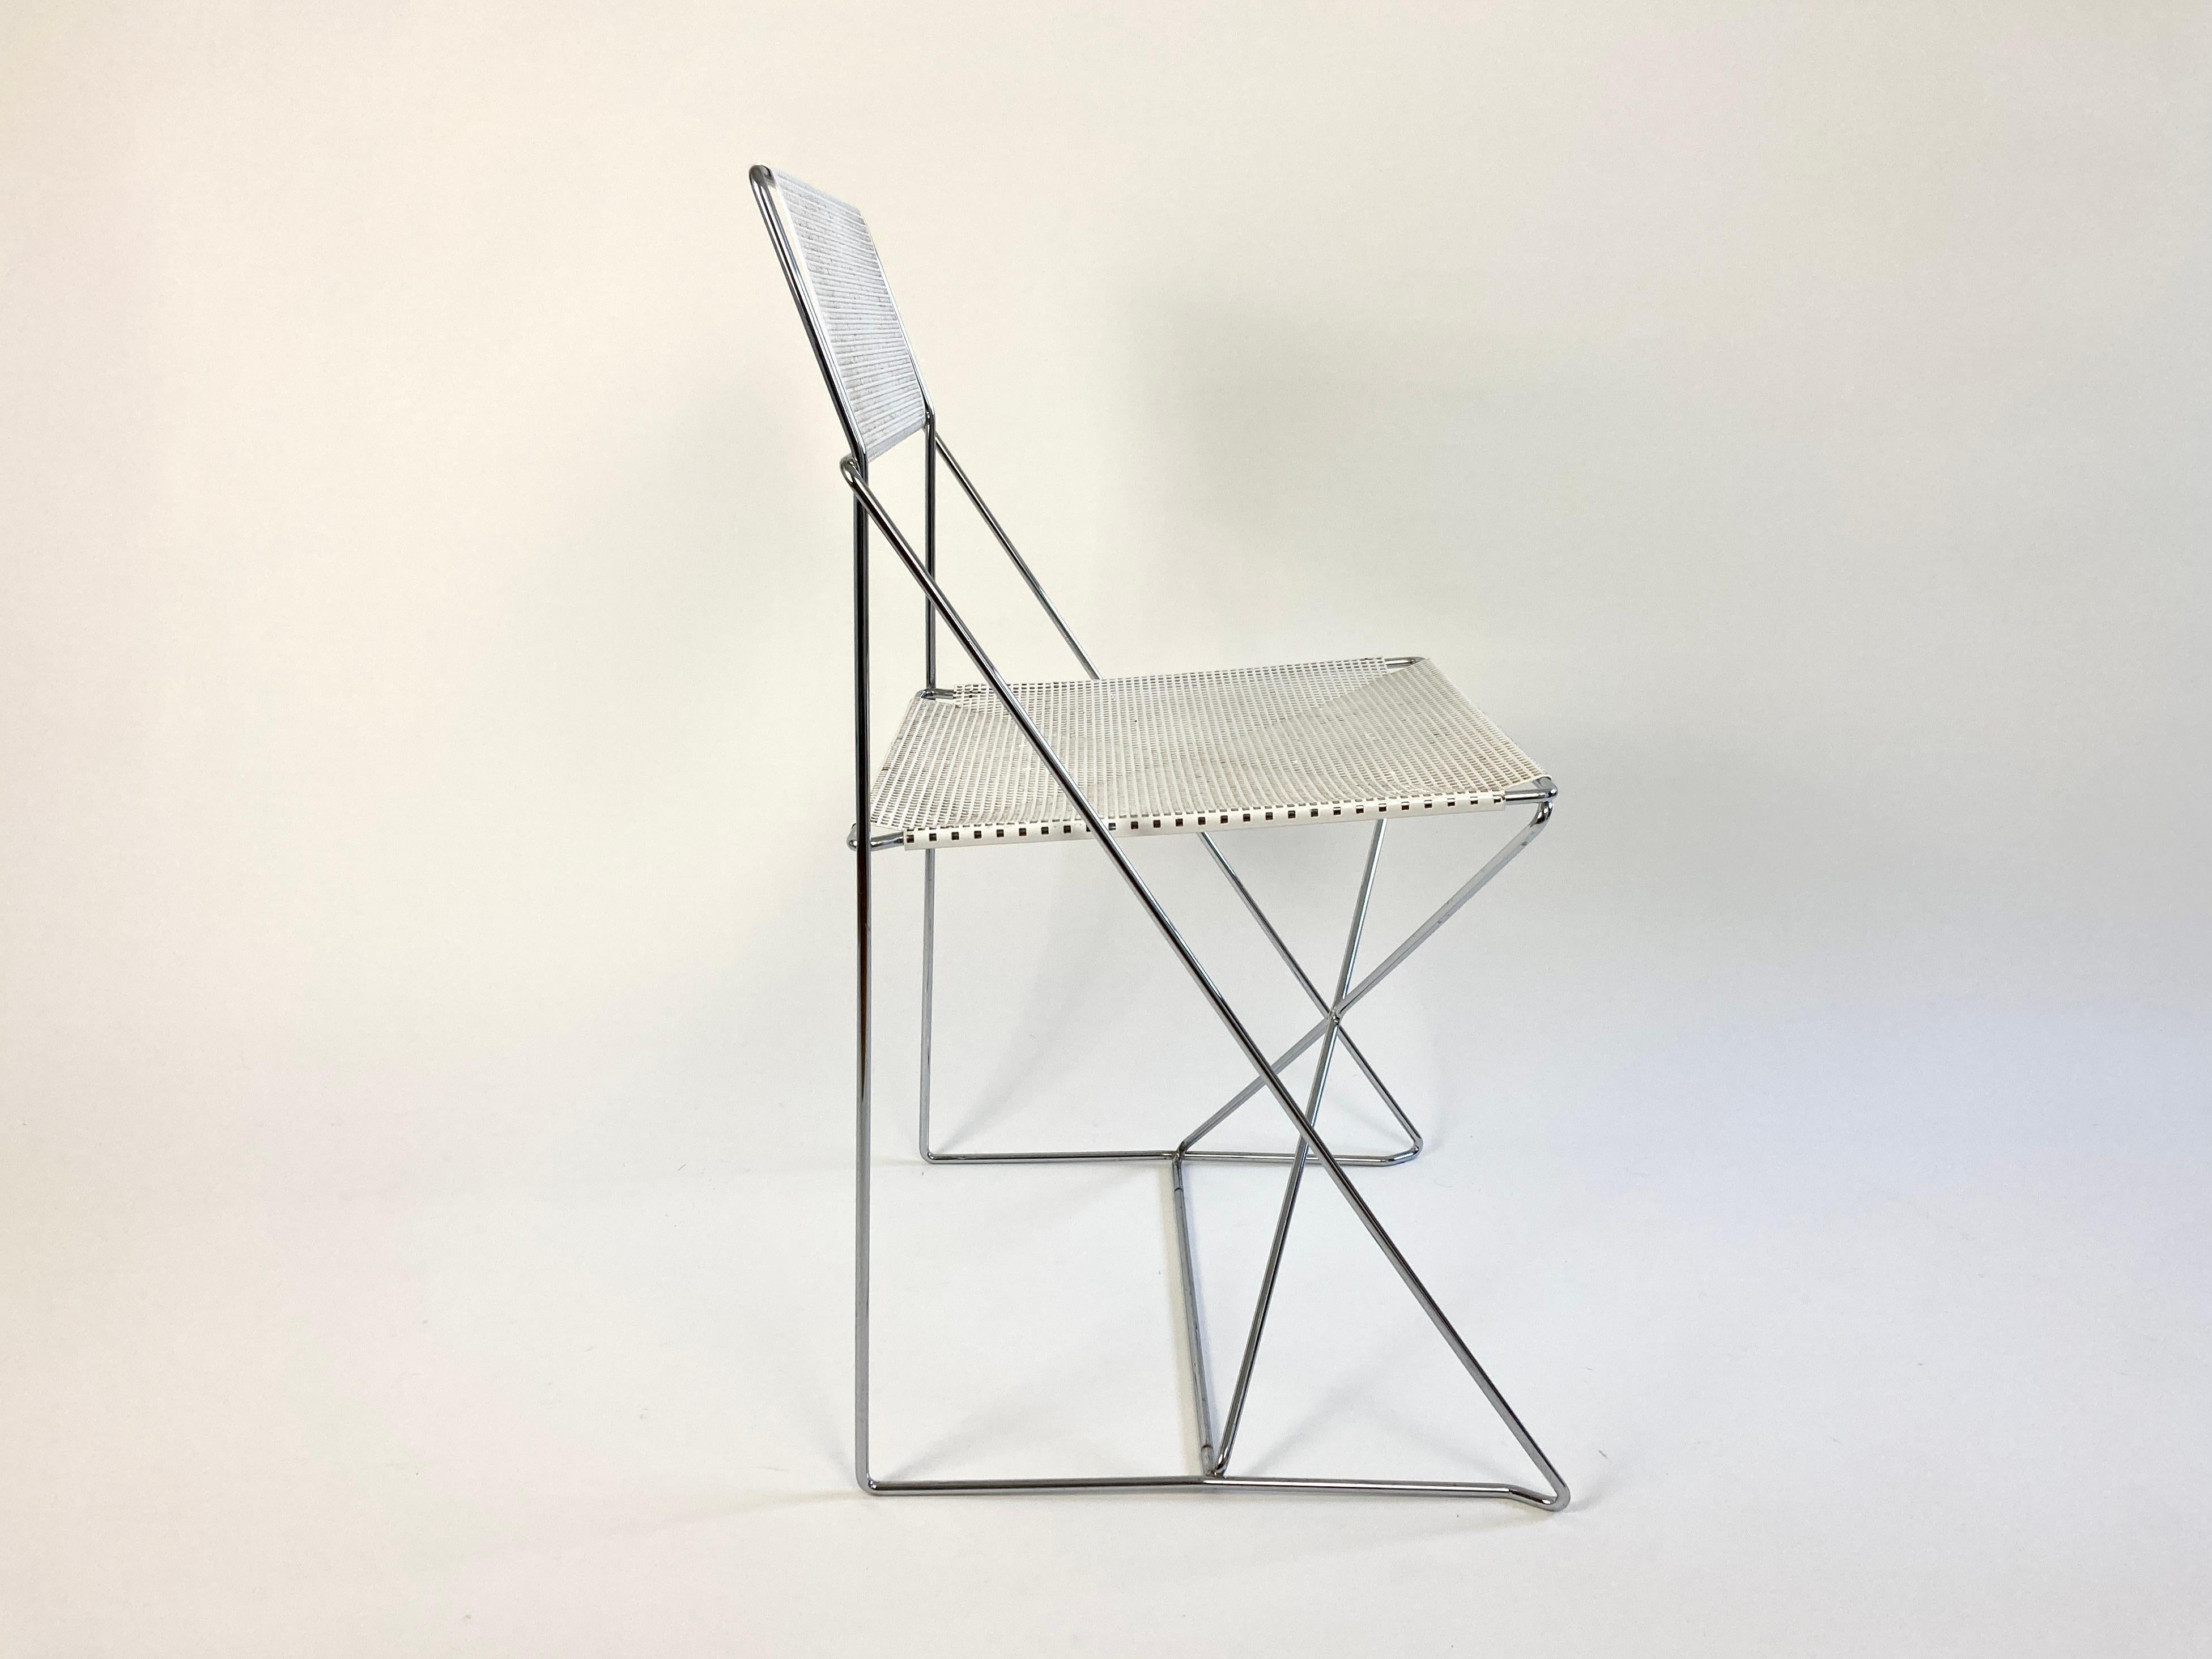 X-line chair designed by architect Niels Jørgen Haugesen in 1977 and manufactured by Hybodan.

Minimalist postmodern design with simple graphic form 

Chrome plated steel frame and perforated powder coated metal sheet seat and backrest. 

No